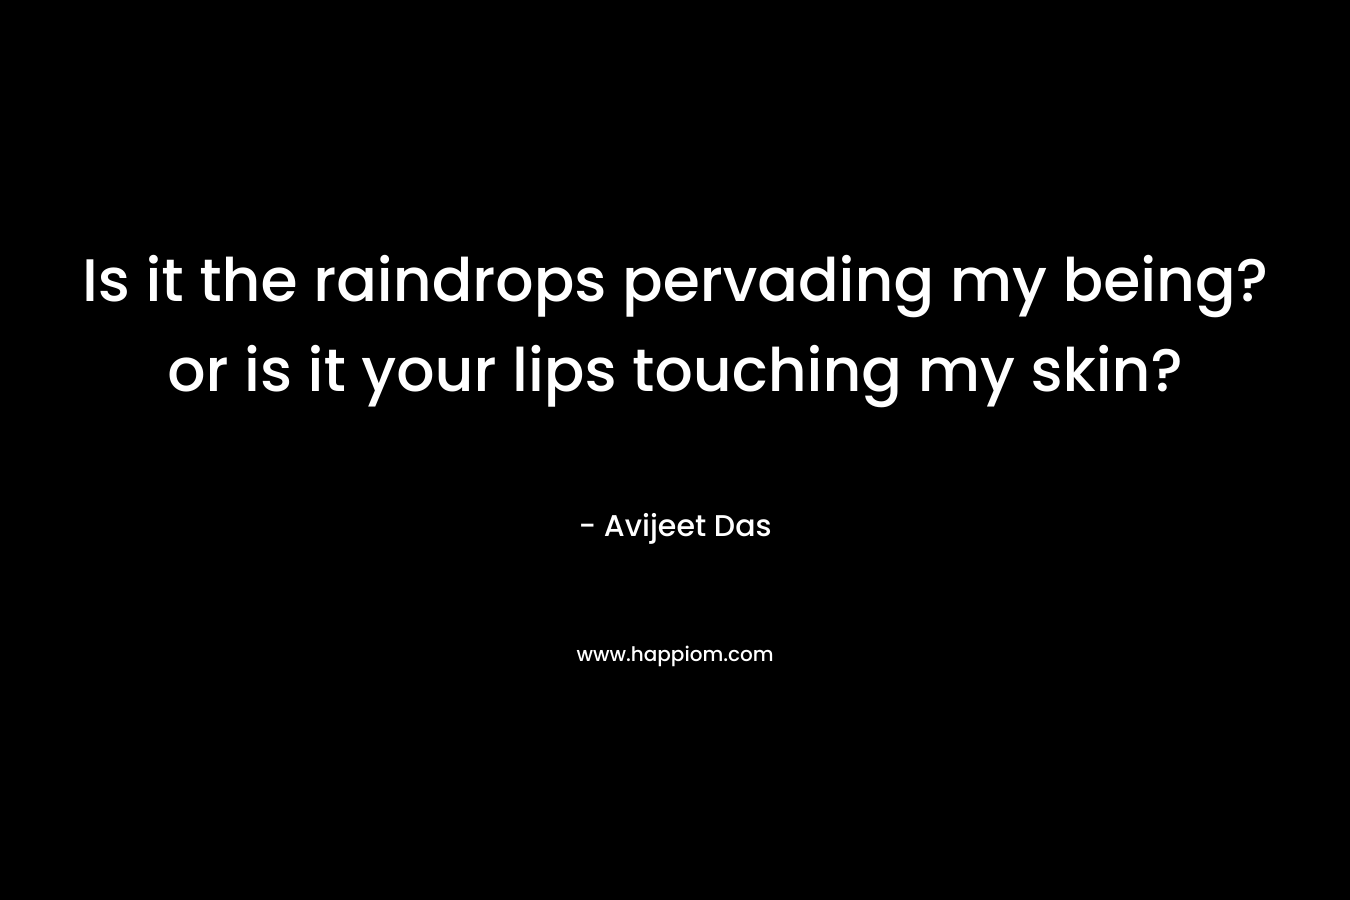 Is it the raindrops pervading my being?or is it your lips touching my skin?